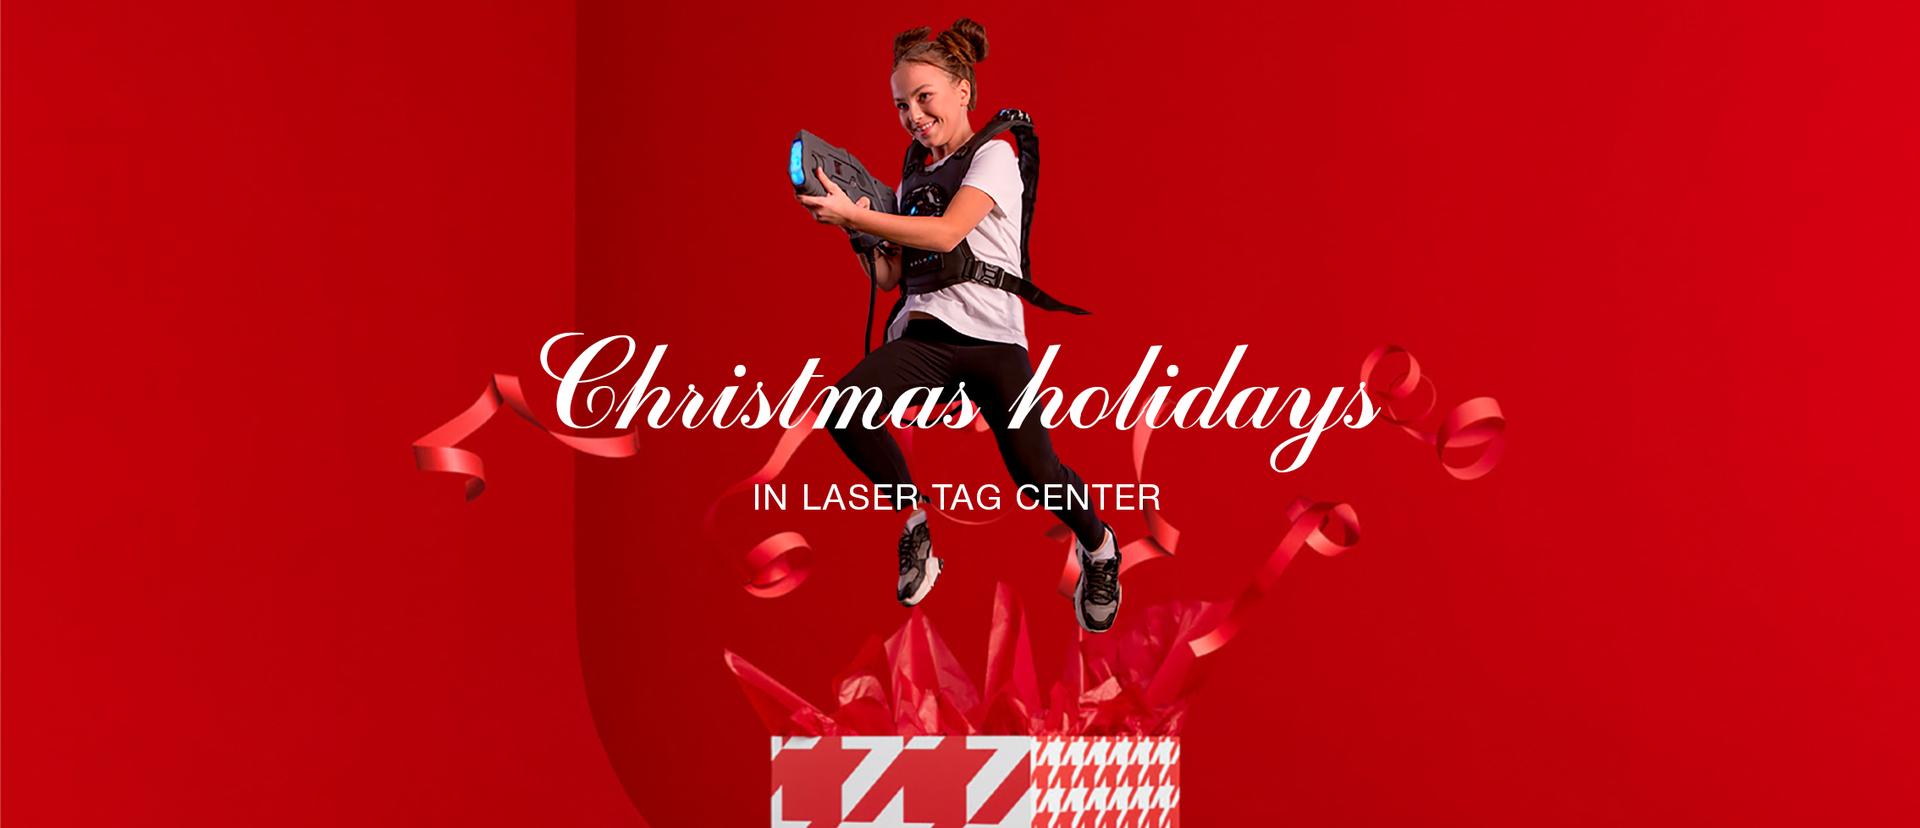 How to organize a winter holiday celebration at the laser tag center?